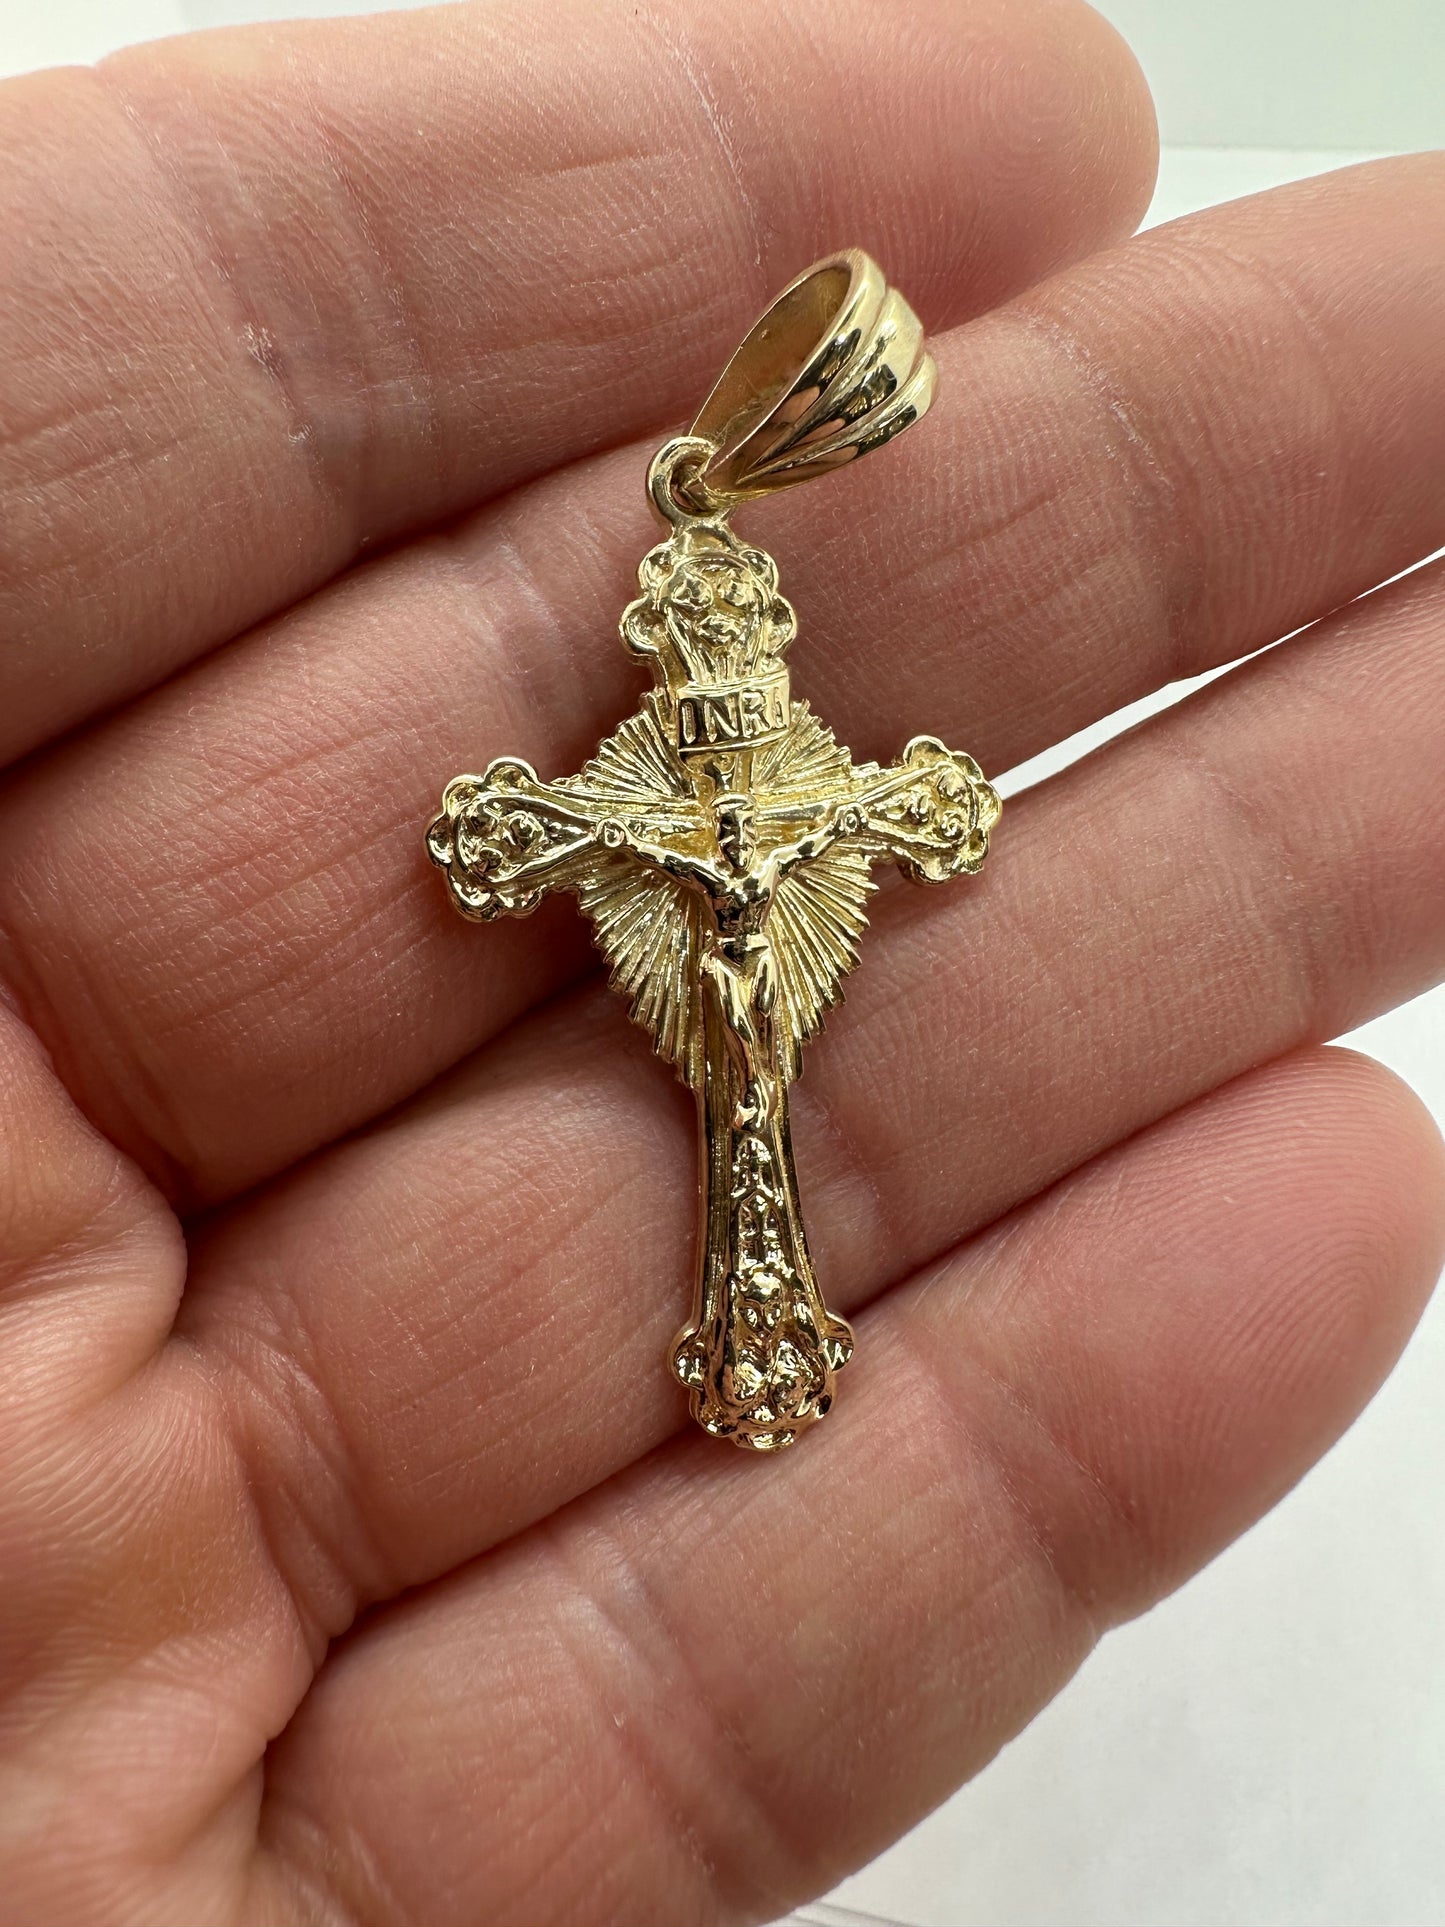 9ct Yellow Gold 49x25mm Solid Crucifix Pendant (0053)